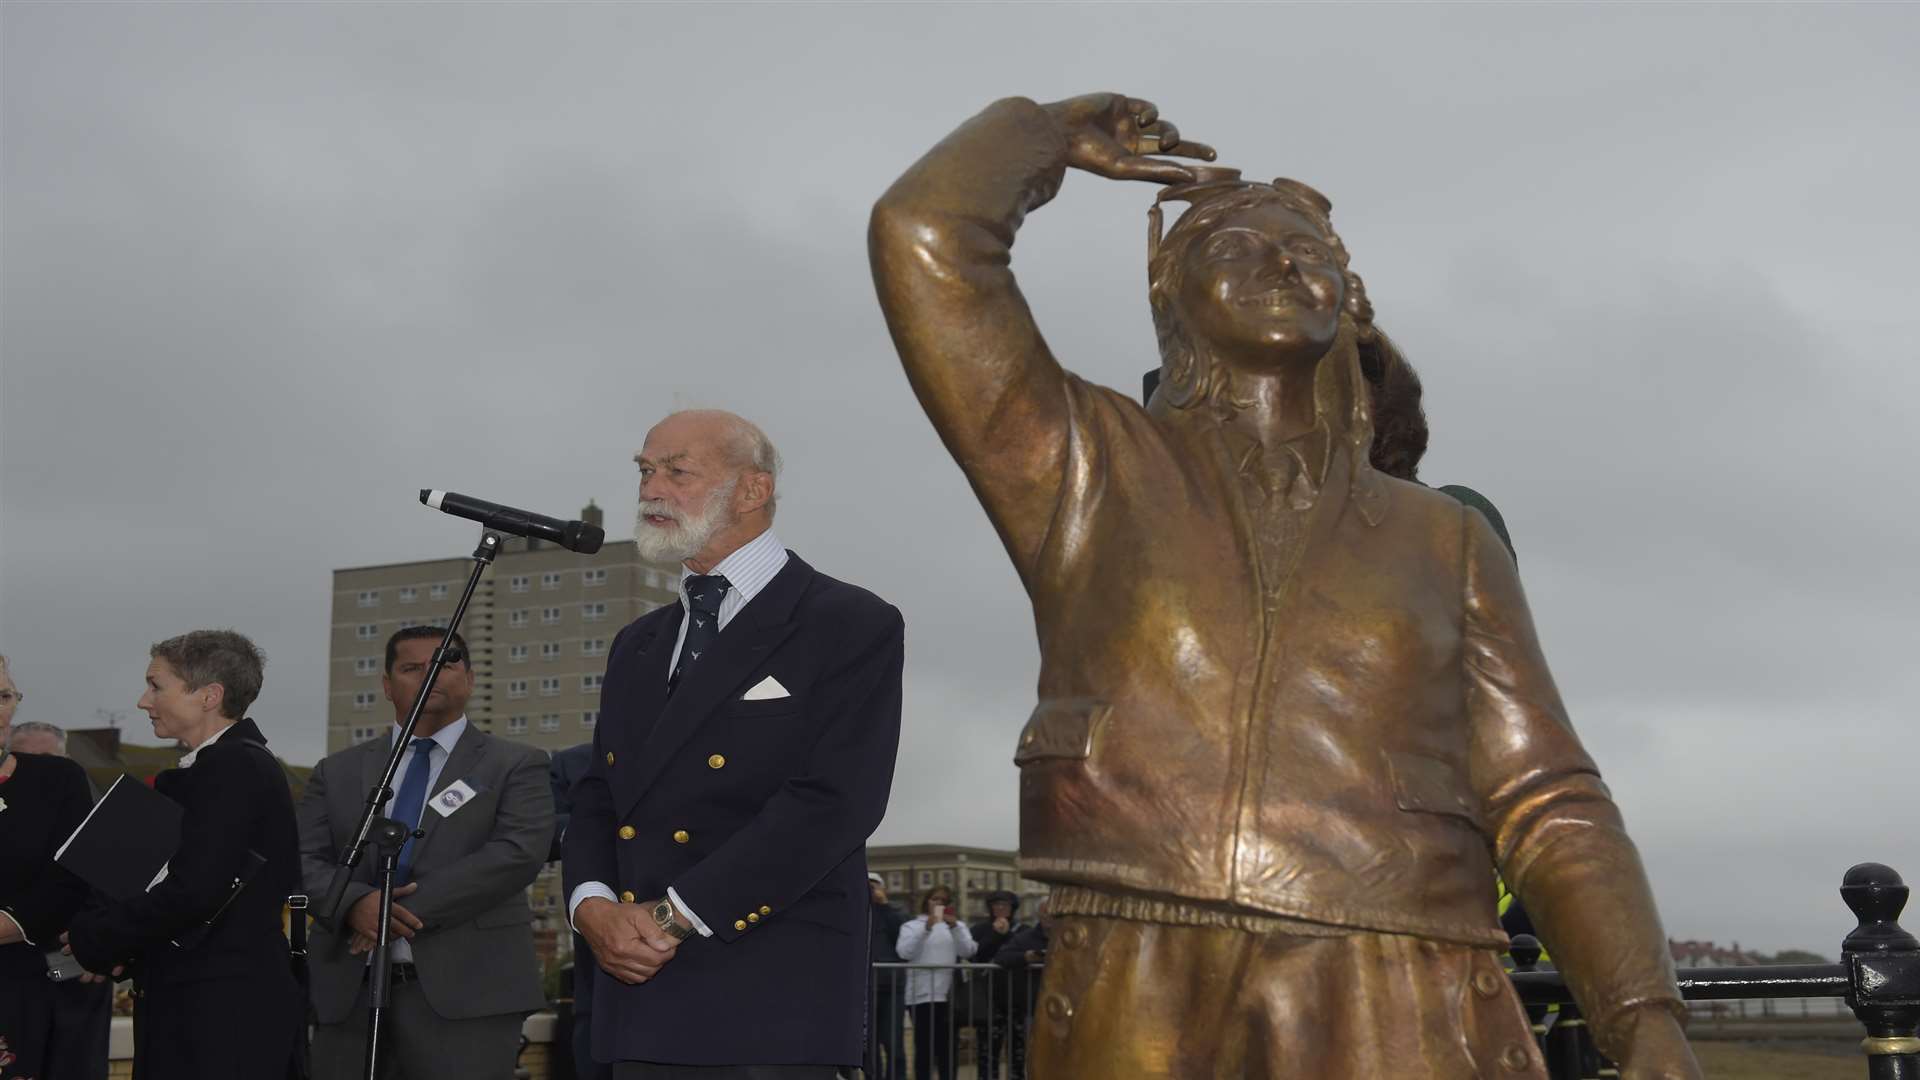 Prince Michael of Kent unveiled the Amy Johnson statue last year